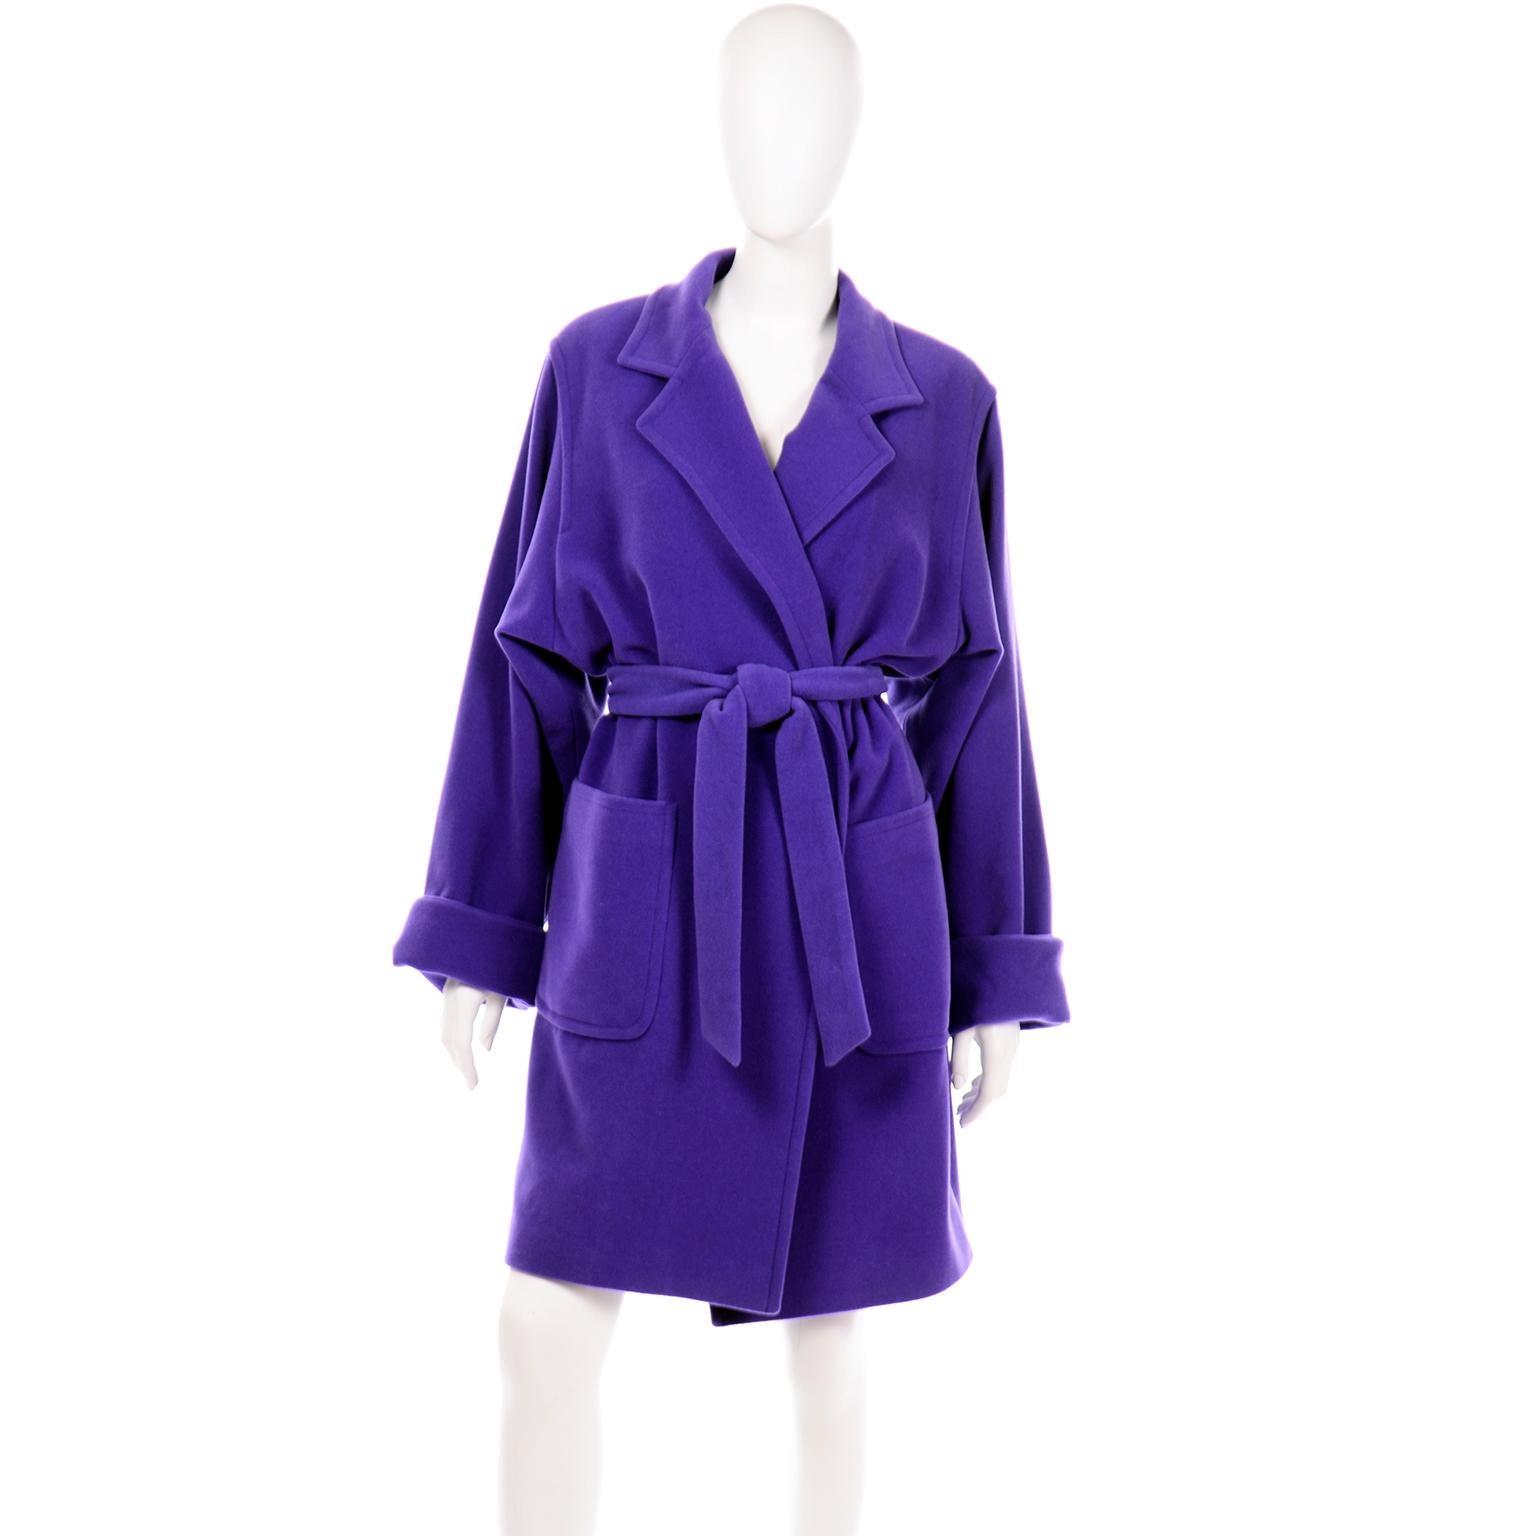 This gorgeous angora wool blend coat is in a beautiful rich jewel tone shade of purple. This trench style coat has a matching fabric belt and deep front pockets. The sleeves are long and wide with big folded cuffs and the coat is fully lined. There